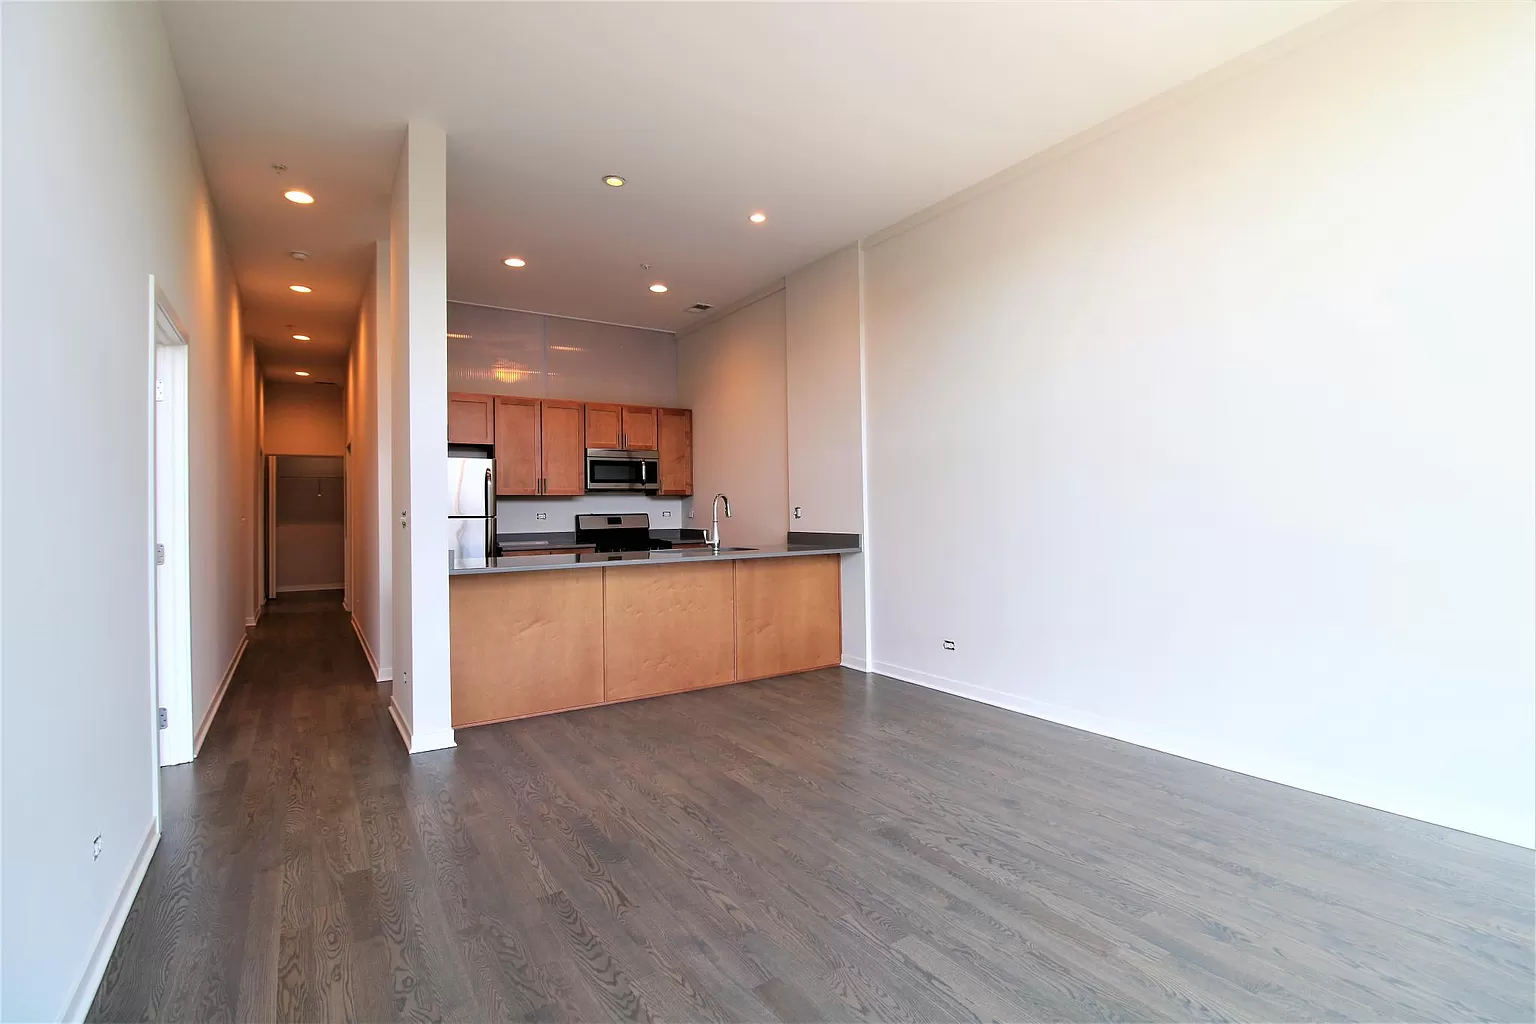 Chicago ORT Technical Institute Housing 2.5 Bed 2 bath apartment - Available for lease takeover or looking for a room mate for Chicago ORT Technical Institute Students in Skokie, IL